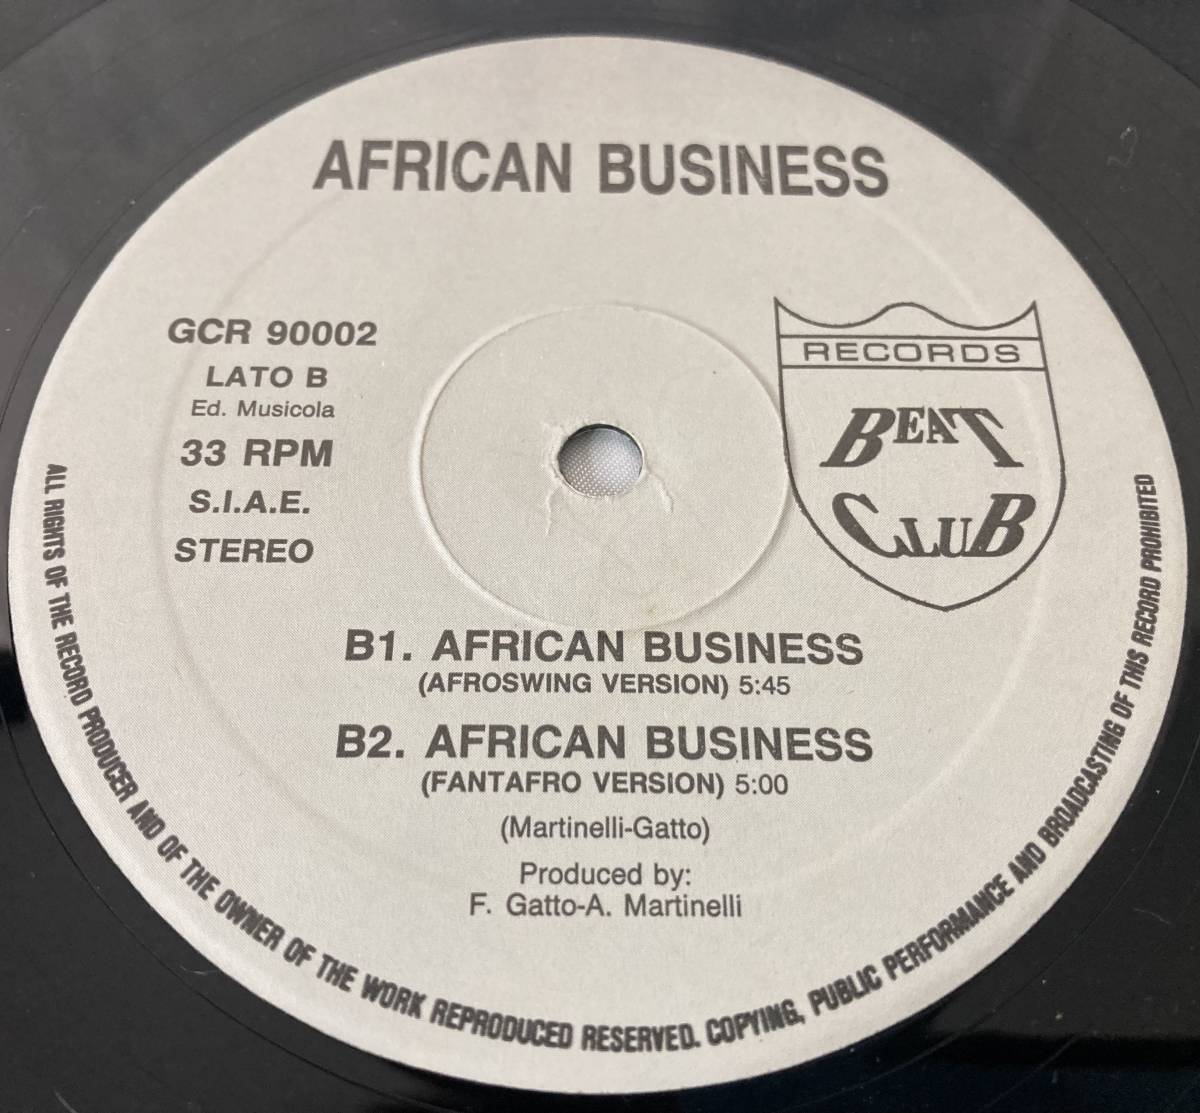 African Business In Zaire【伊盤/試聴検品済】90'/Electronic/Tribal/Euro House/Hip-House/12inch シングル_画像5